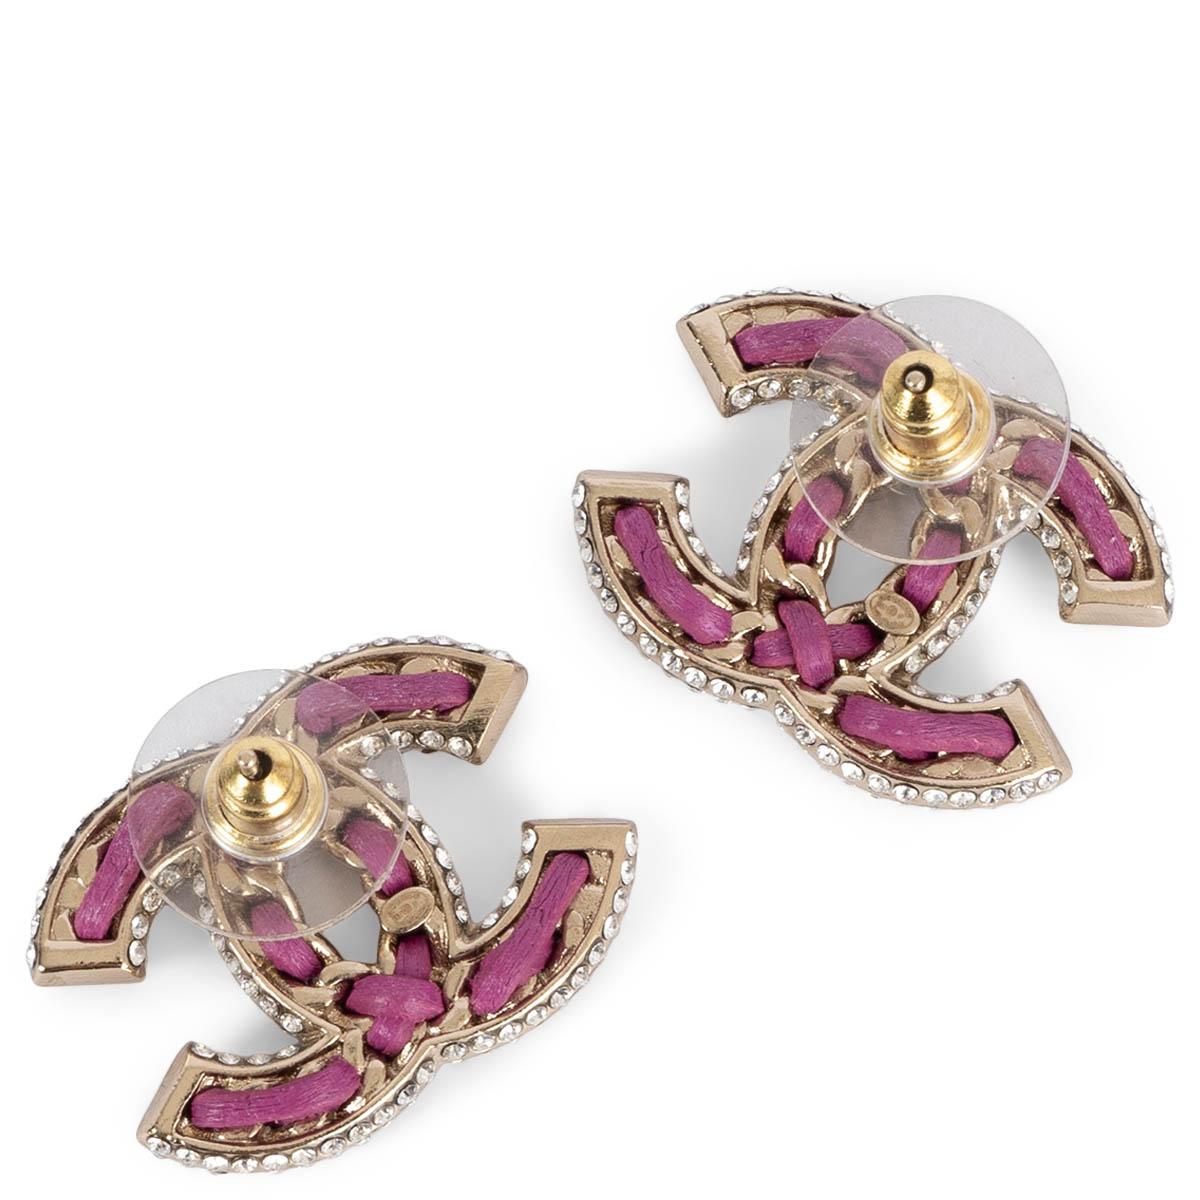 100% authentic Chanel fuchsia leather woven chain and crystal embellished CC ear studs in light gold-tone metal. Have been worn and are in excellent condition. Include felt protection and box. 

2021 Pre-Spring

Measurements
Model	21P
Tag